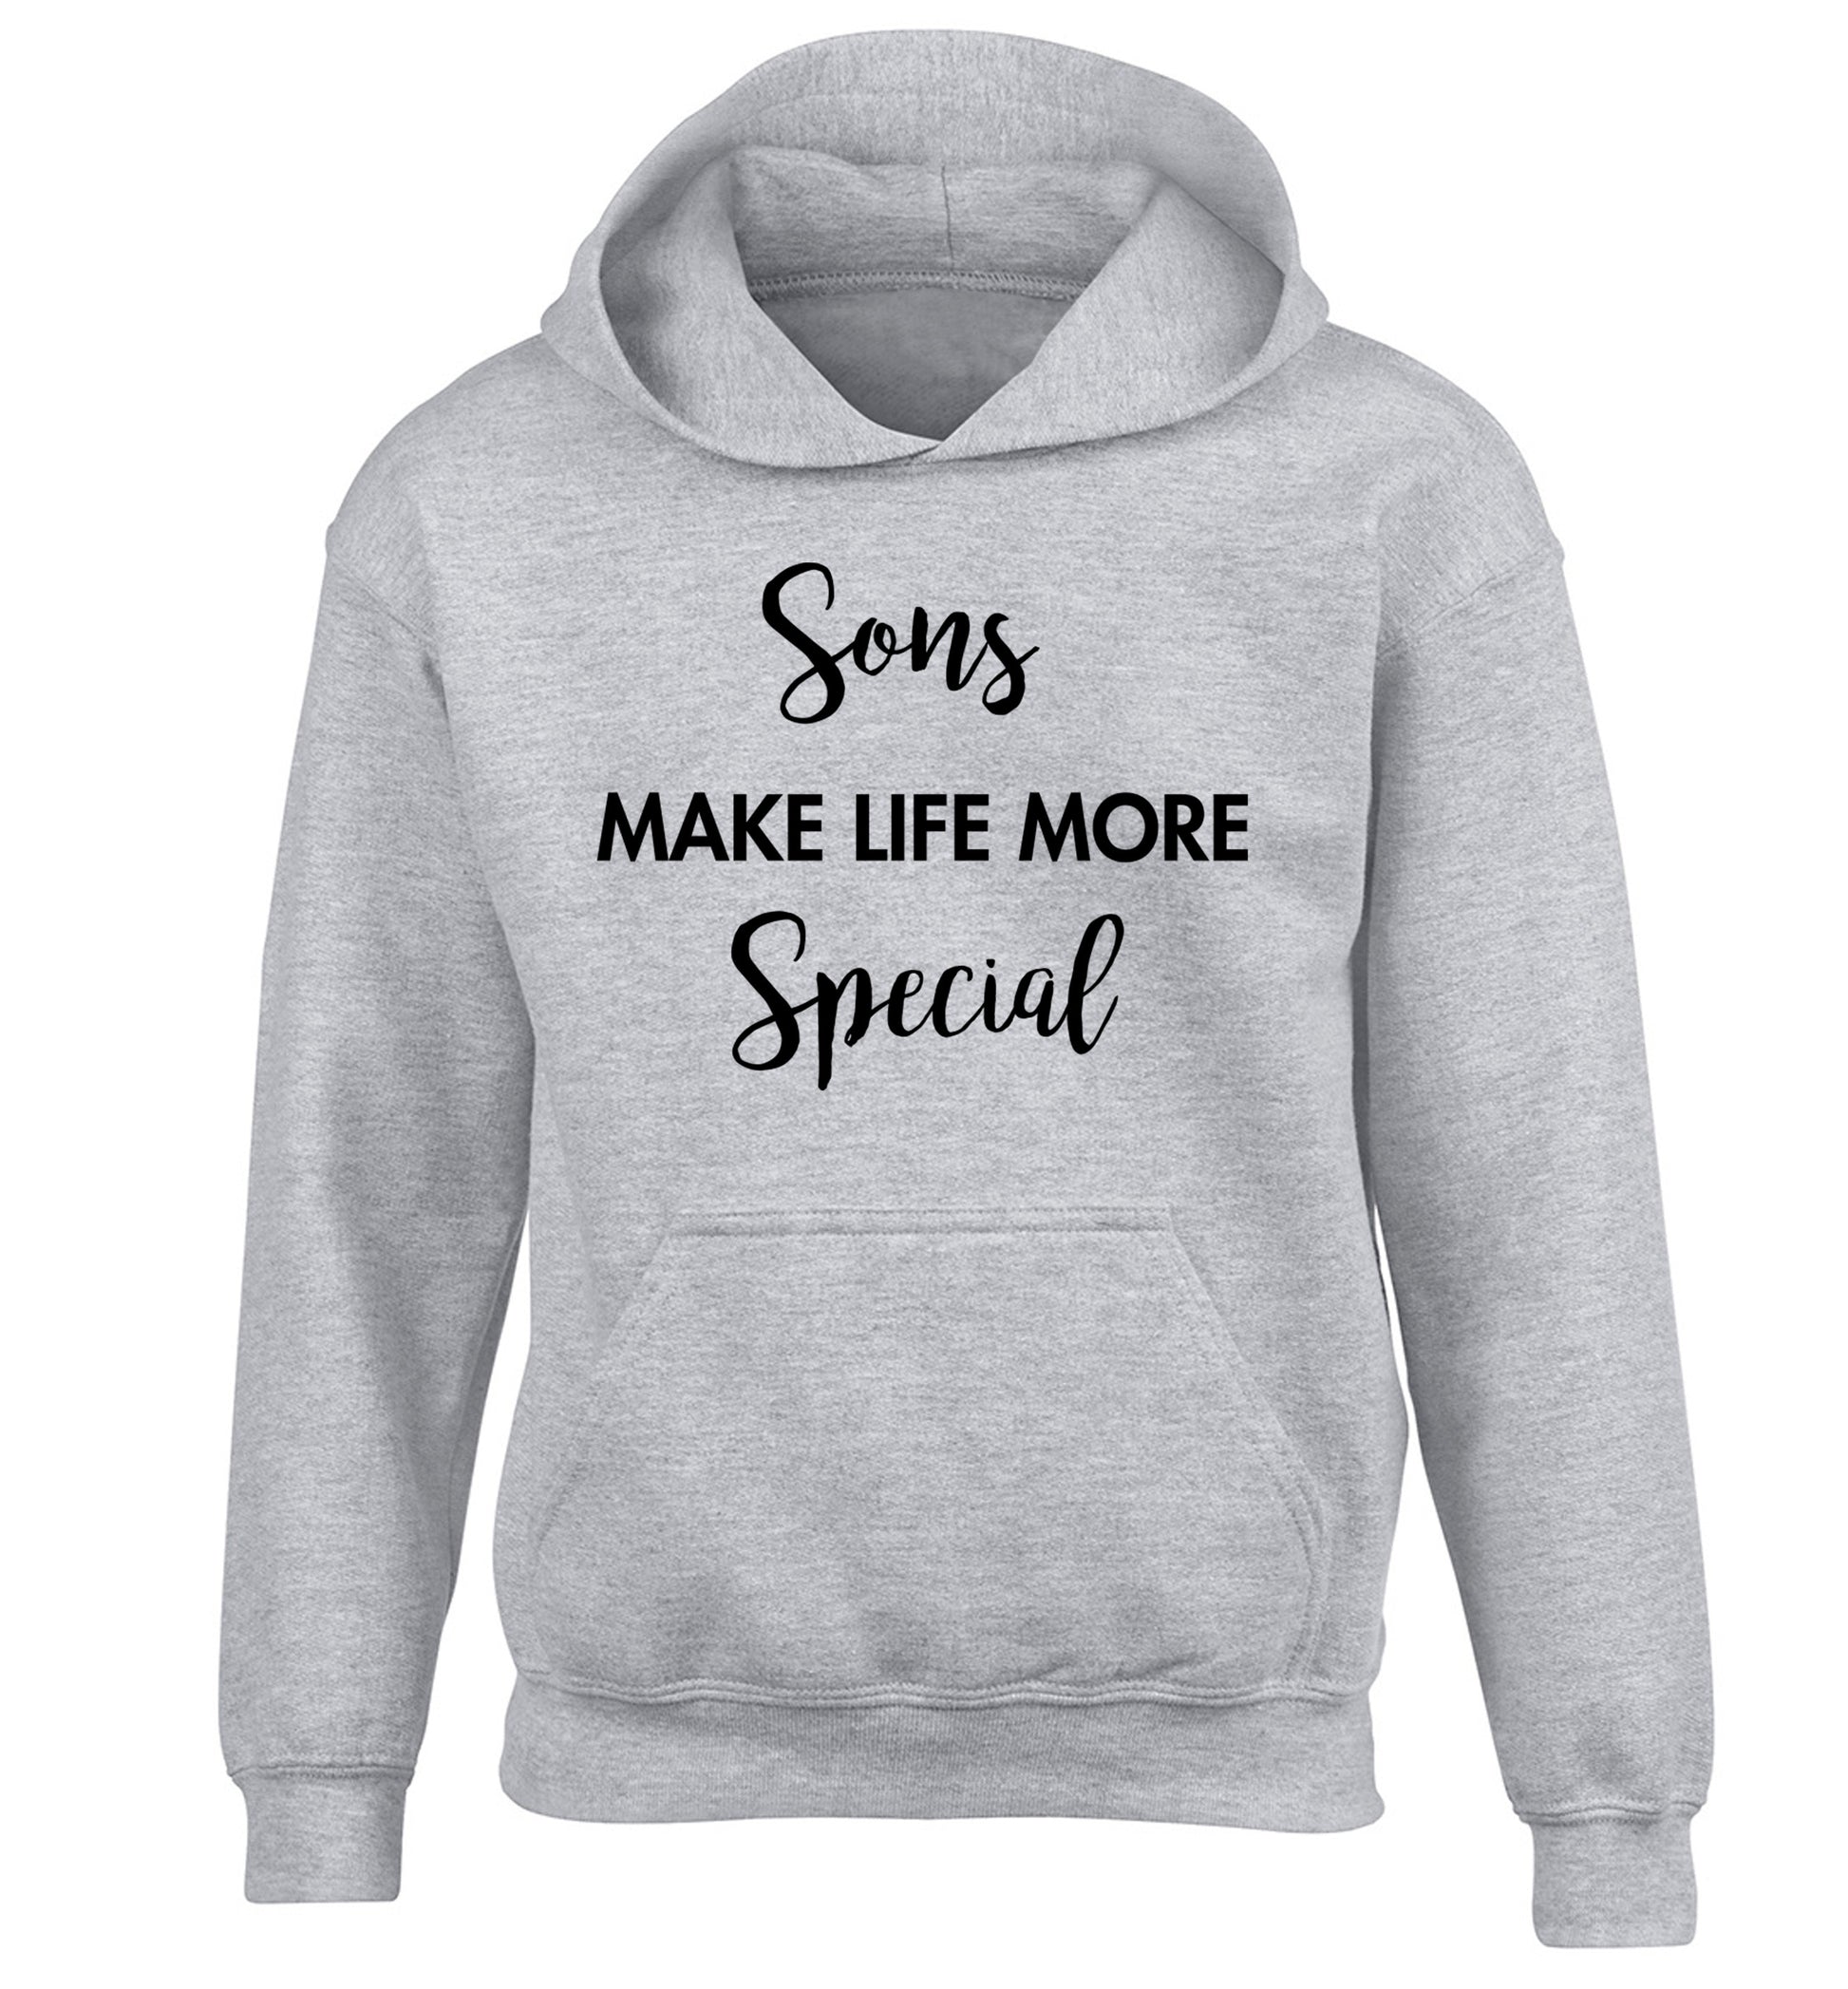 Sons make life more special children's grey hoodie 12-14 Years